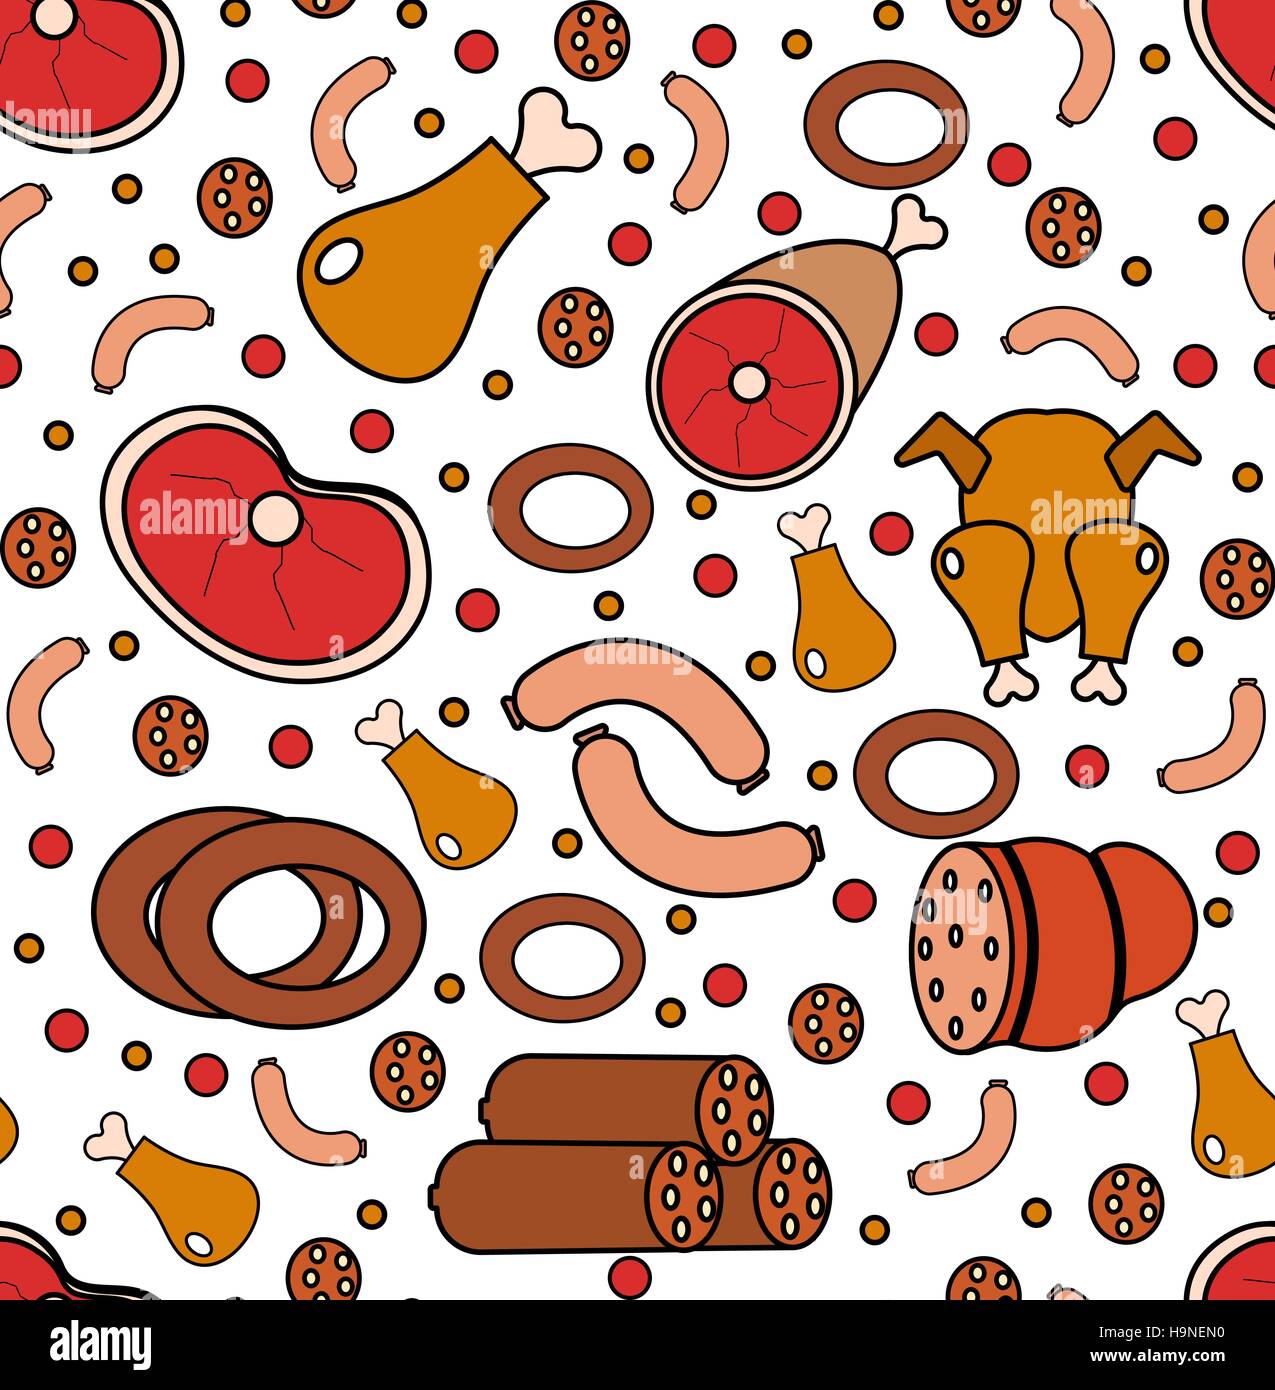 Meat products seamless pattern, modern line, doodle, sketch style. Meats and sausage endless background, texture. Vector illustration Stock Vector